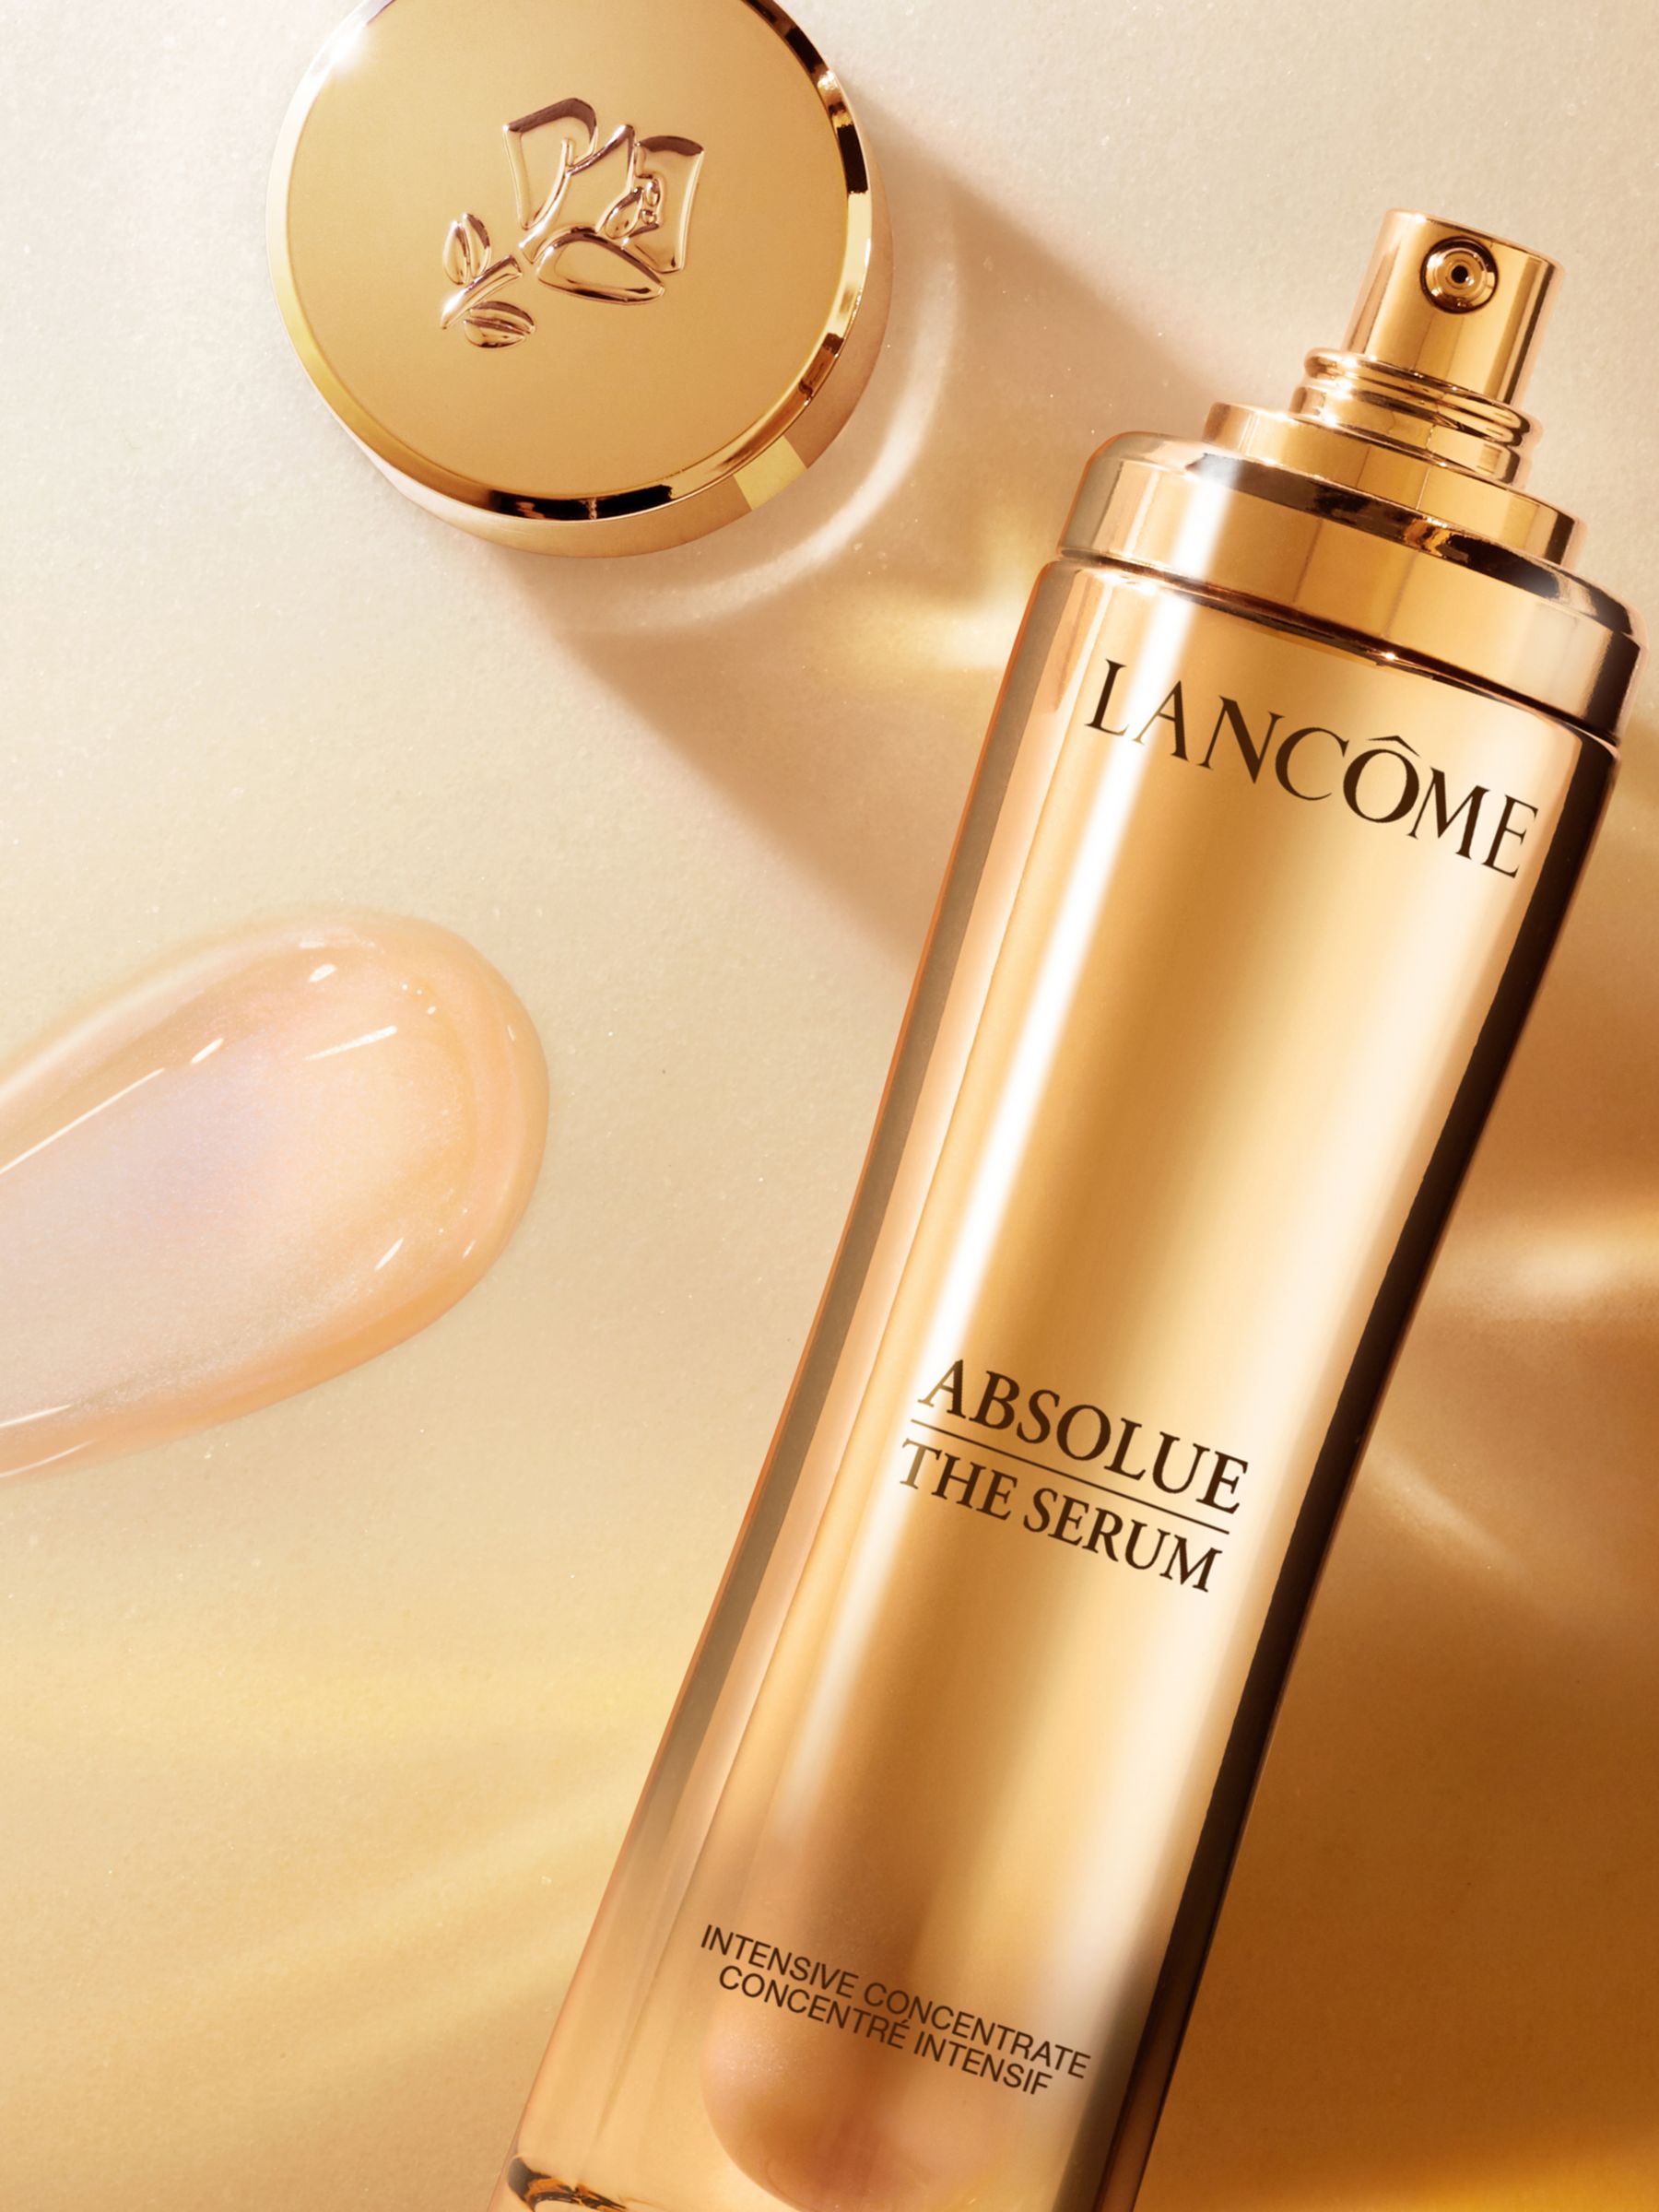 Lancôme Absolue The Serum Intensive Concentrate, 30ml 3